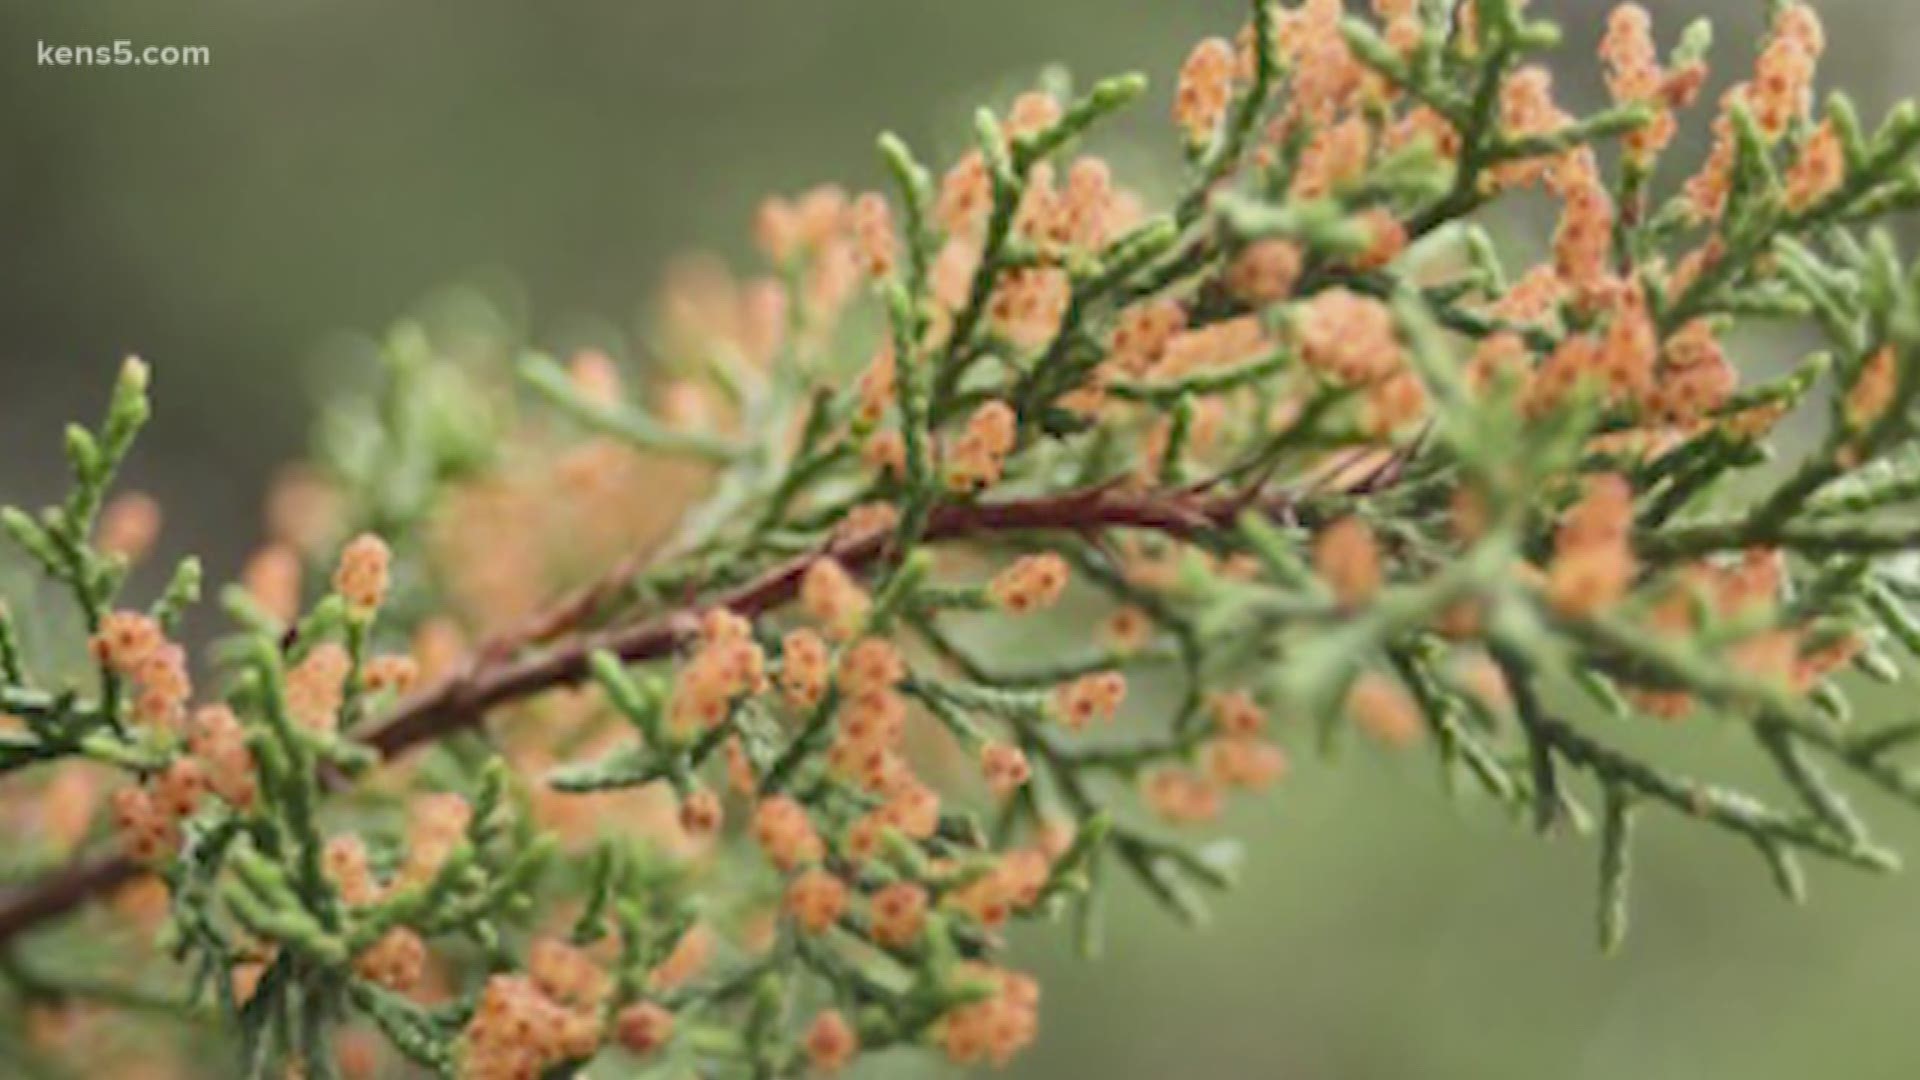 It is the perfect combination of sunlight and temperatures causing the cedar trees to release the pollen that is so small and light it can travel hundreds of miles!